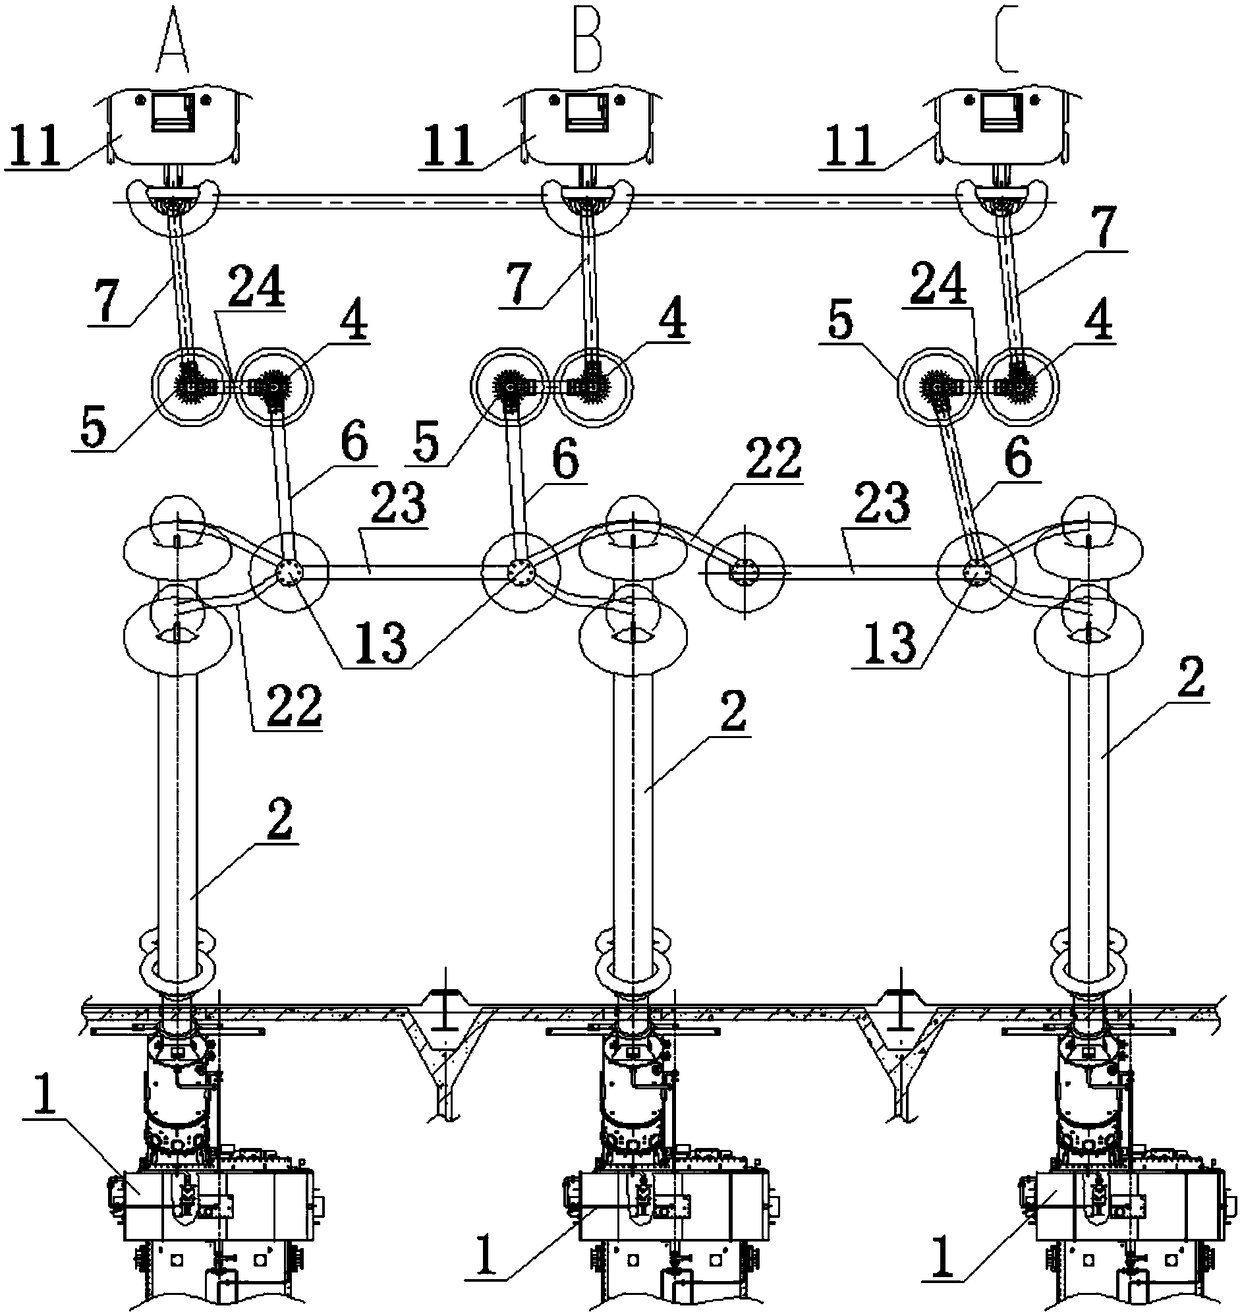 Double-joint connection structure between converter transformers and converter valves